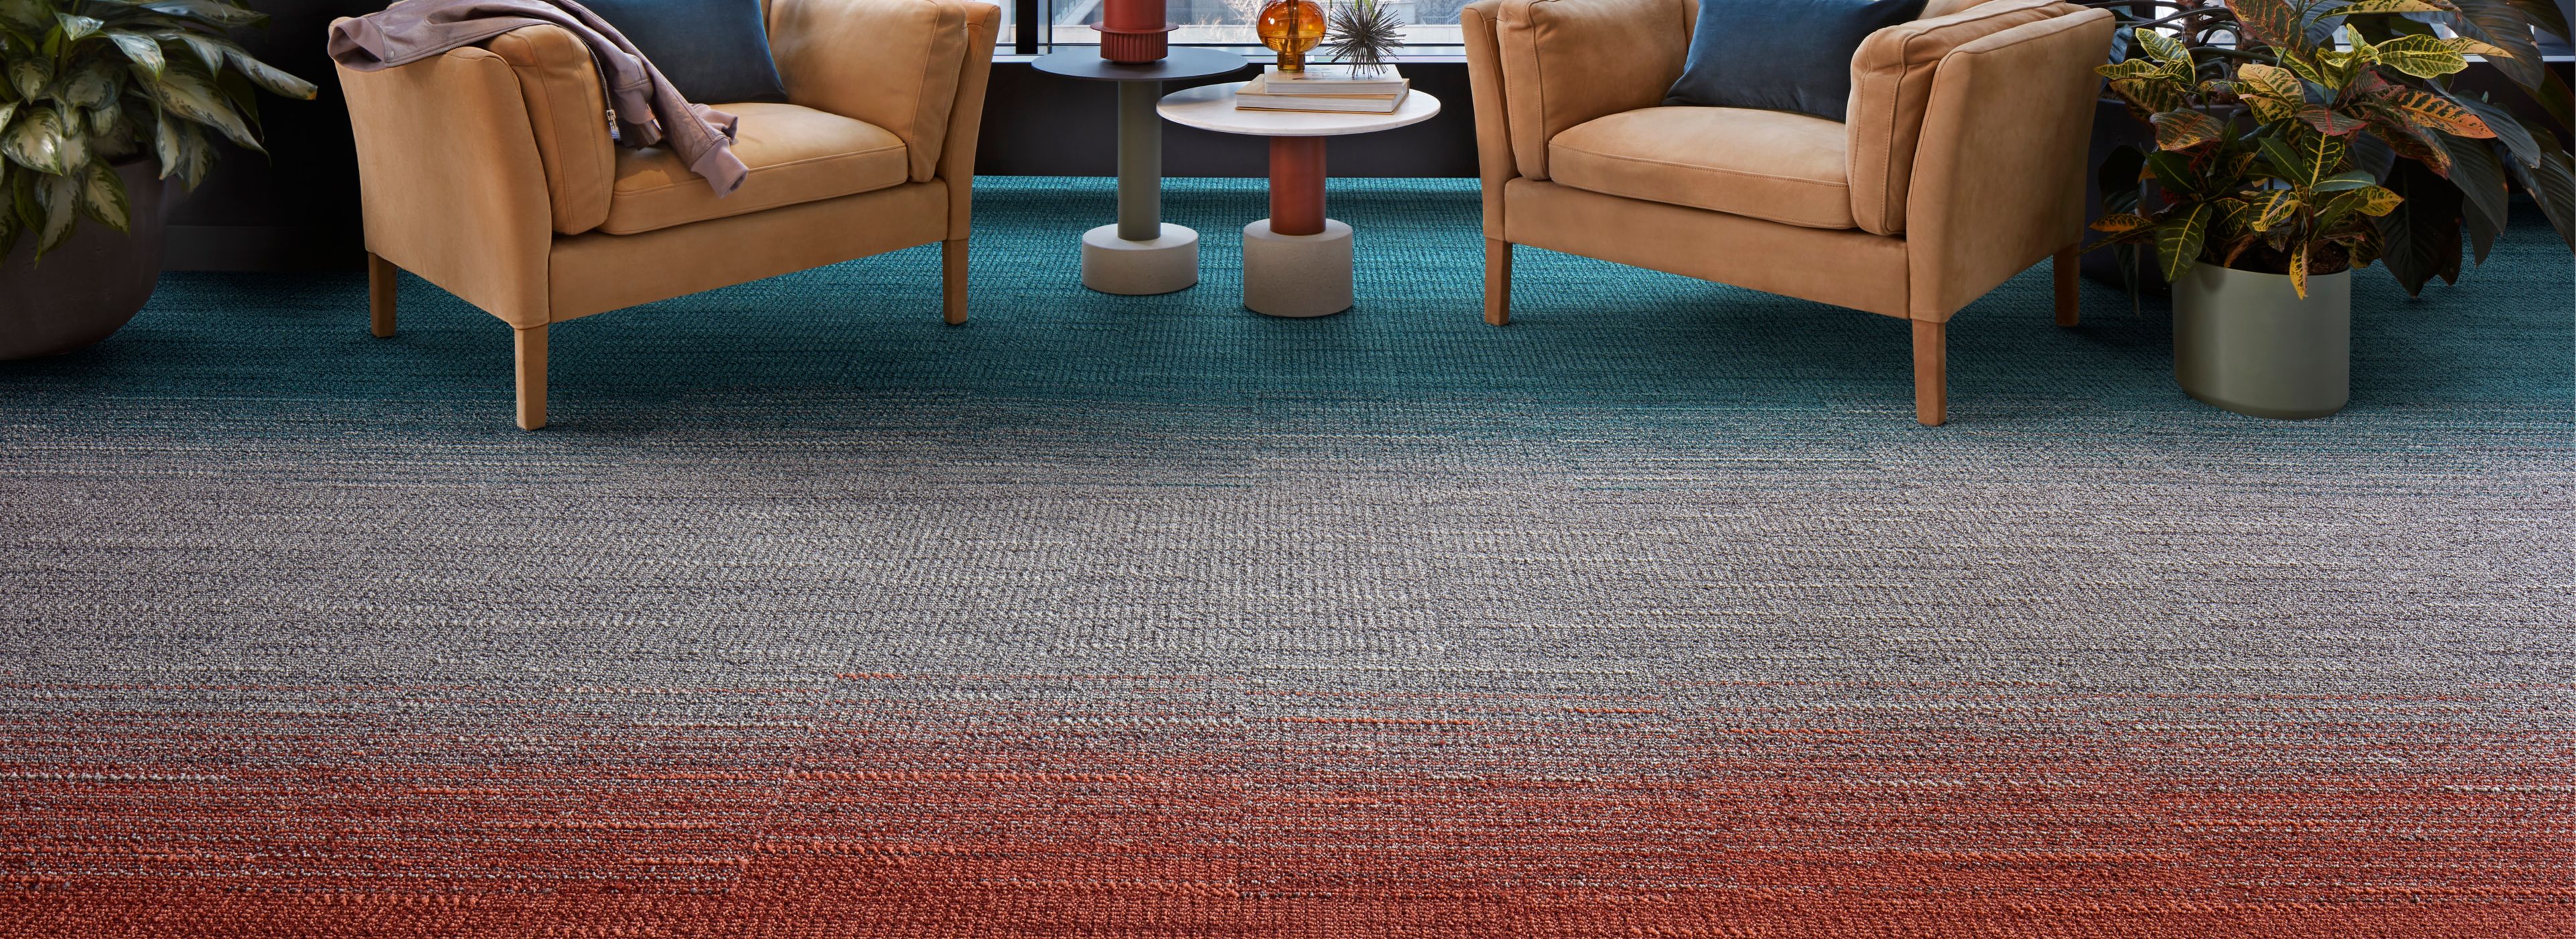 Interface WG100 and WG200 carpet tile in lobby numéro d’image 1